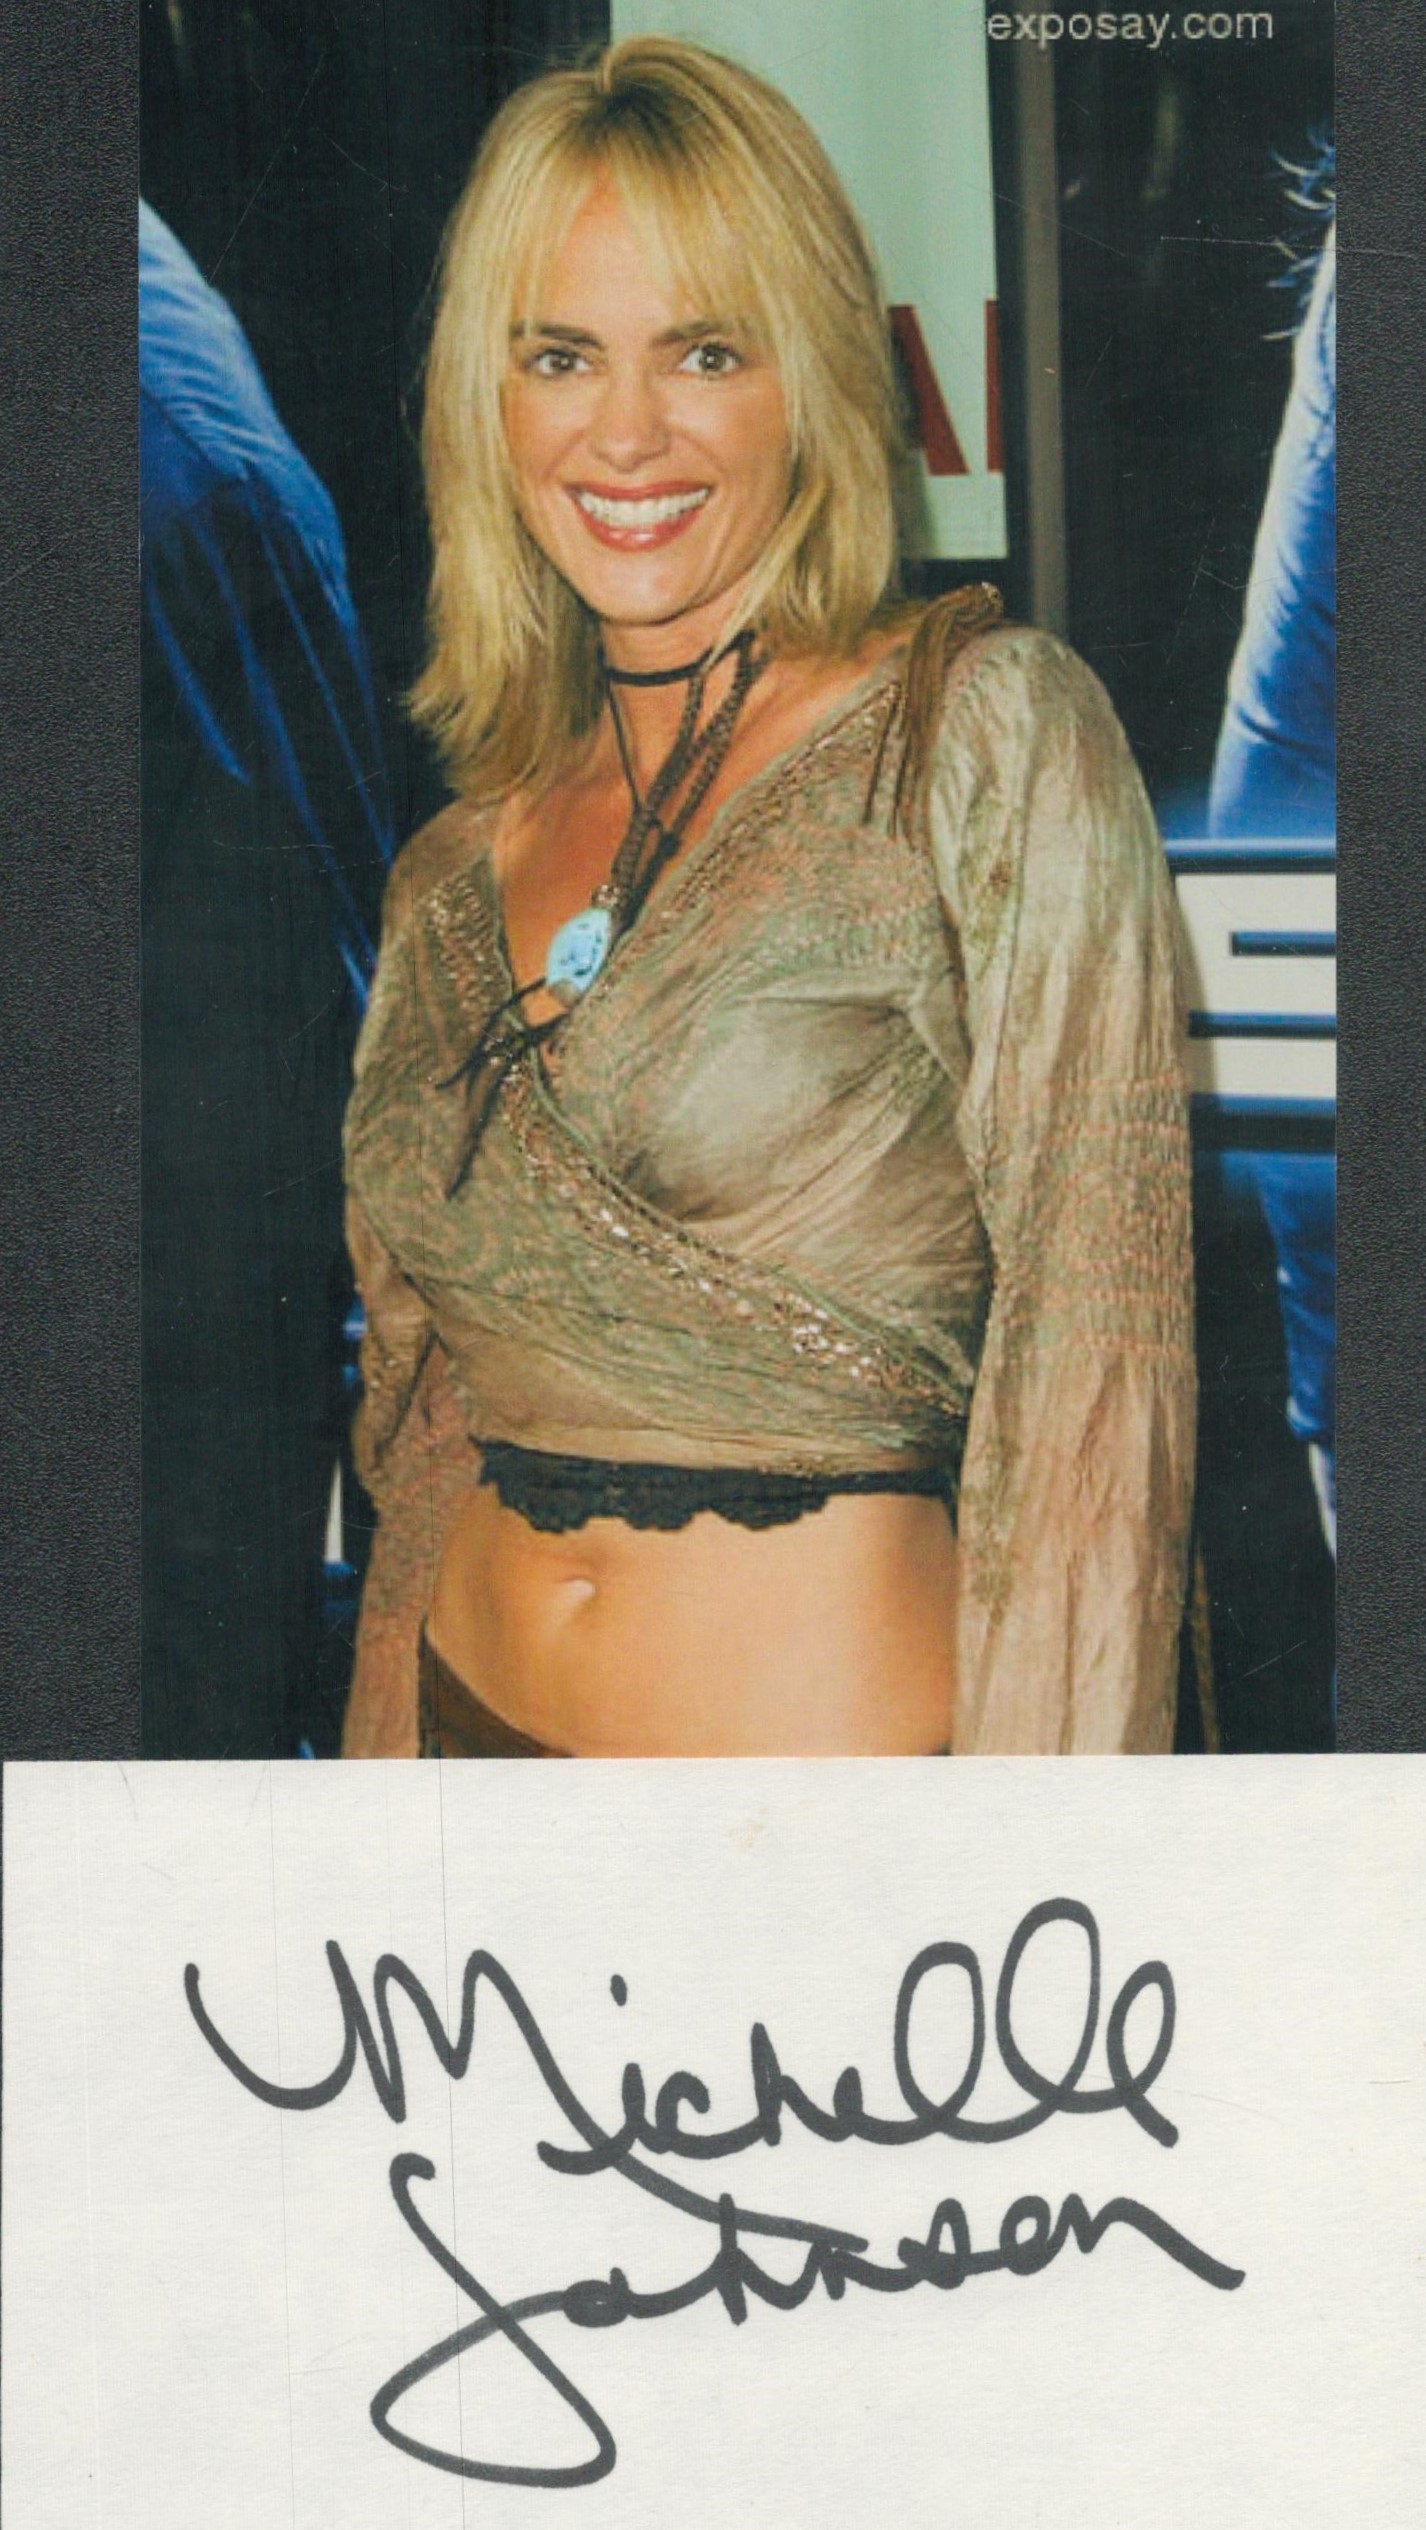 Michelle Johnson signed Autograph page plus colour photo 6x4 Inch. Is an American actress who